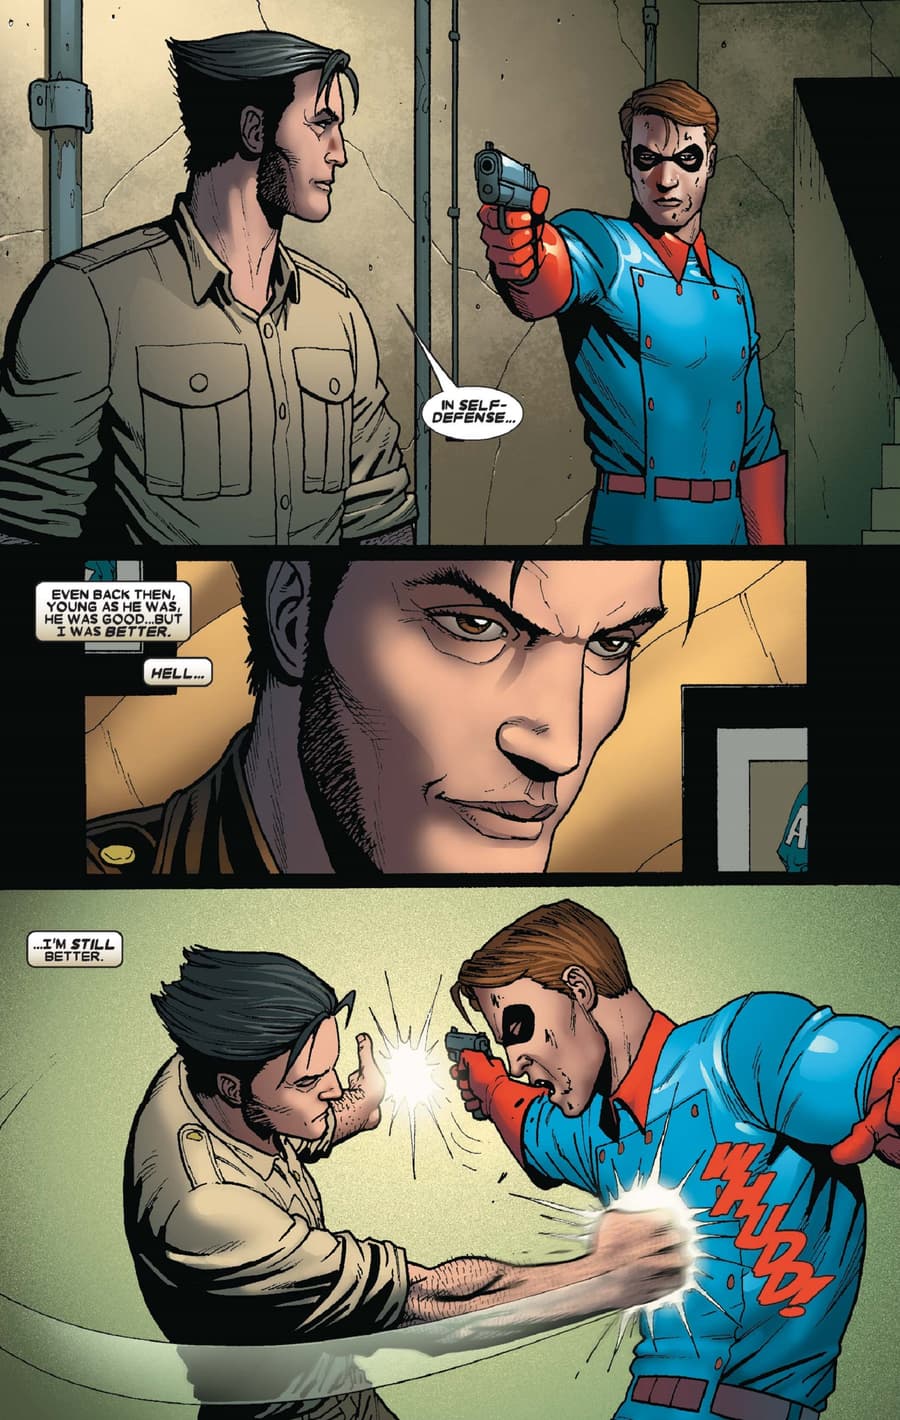 Logan and Bucky show off their different combat styles in WOLVERINE ORIGINS (2006) #19.